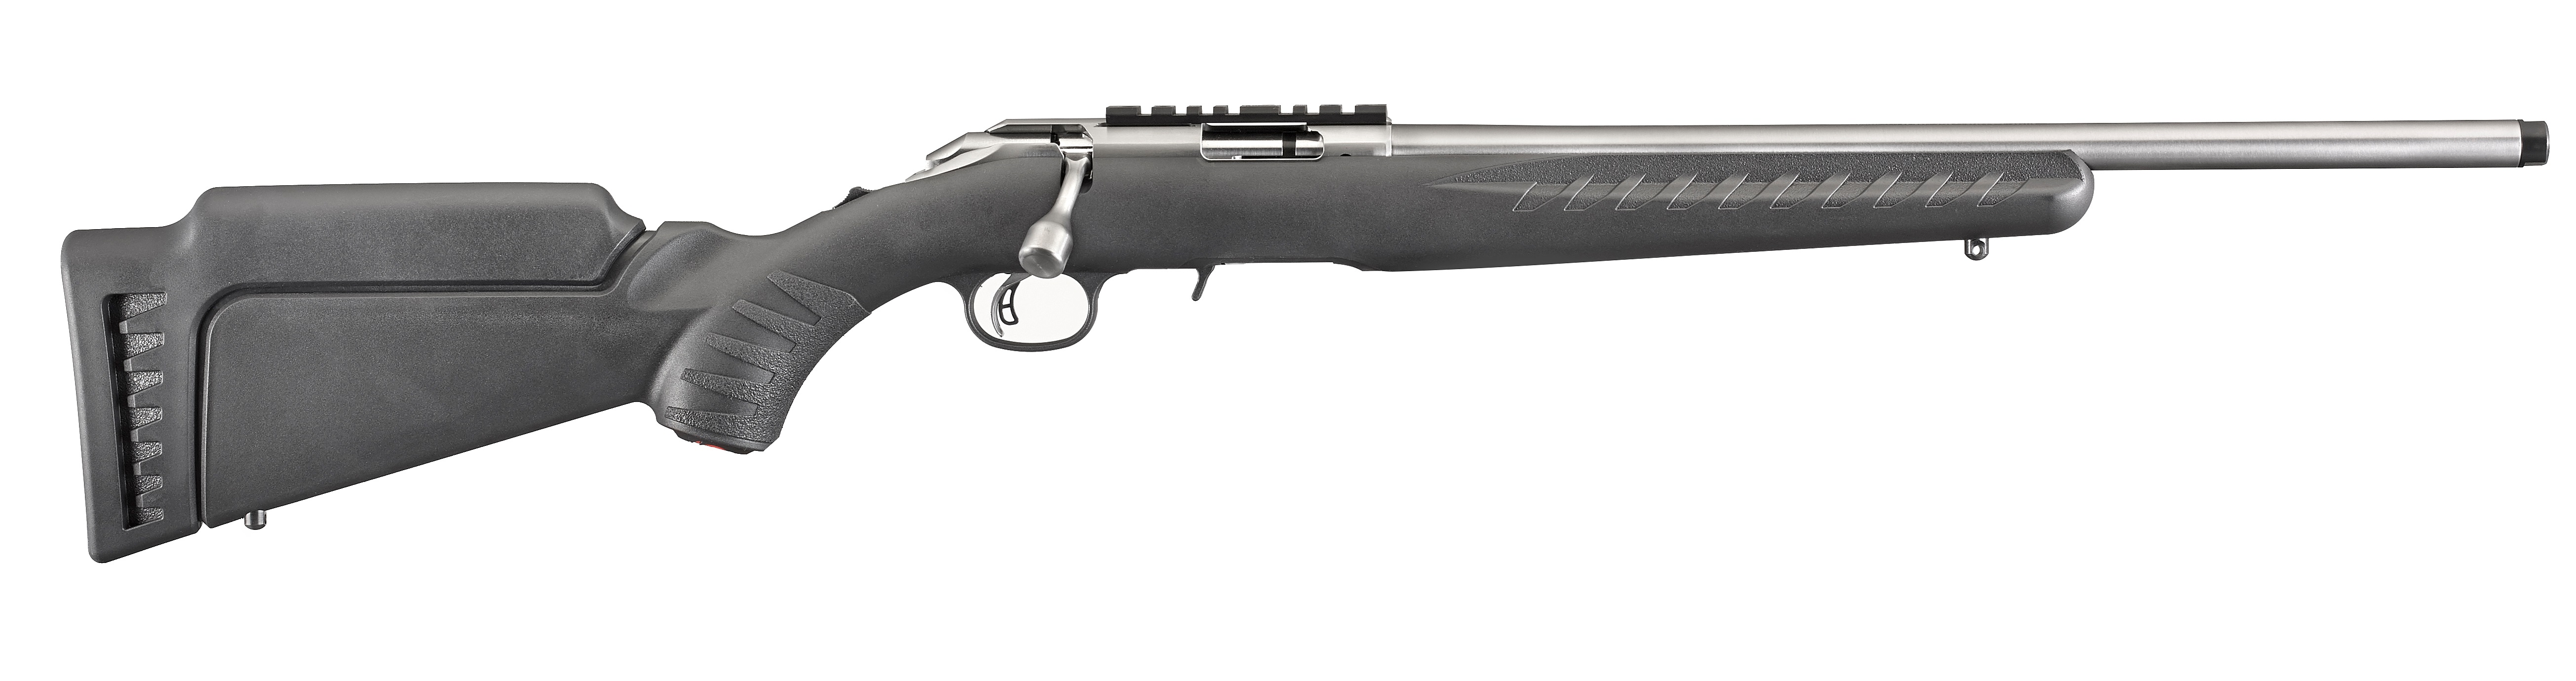 Ruger American Rifle 22 Magnum